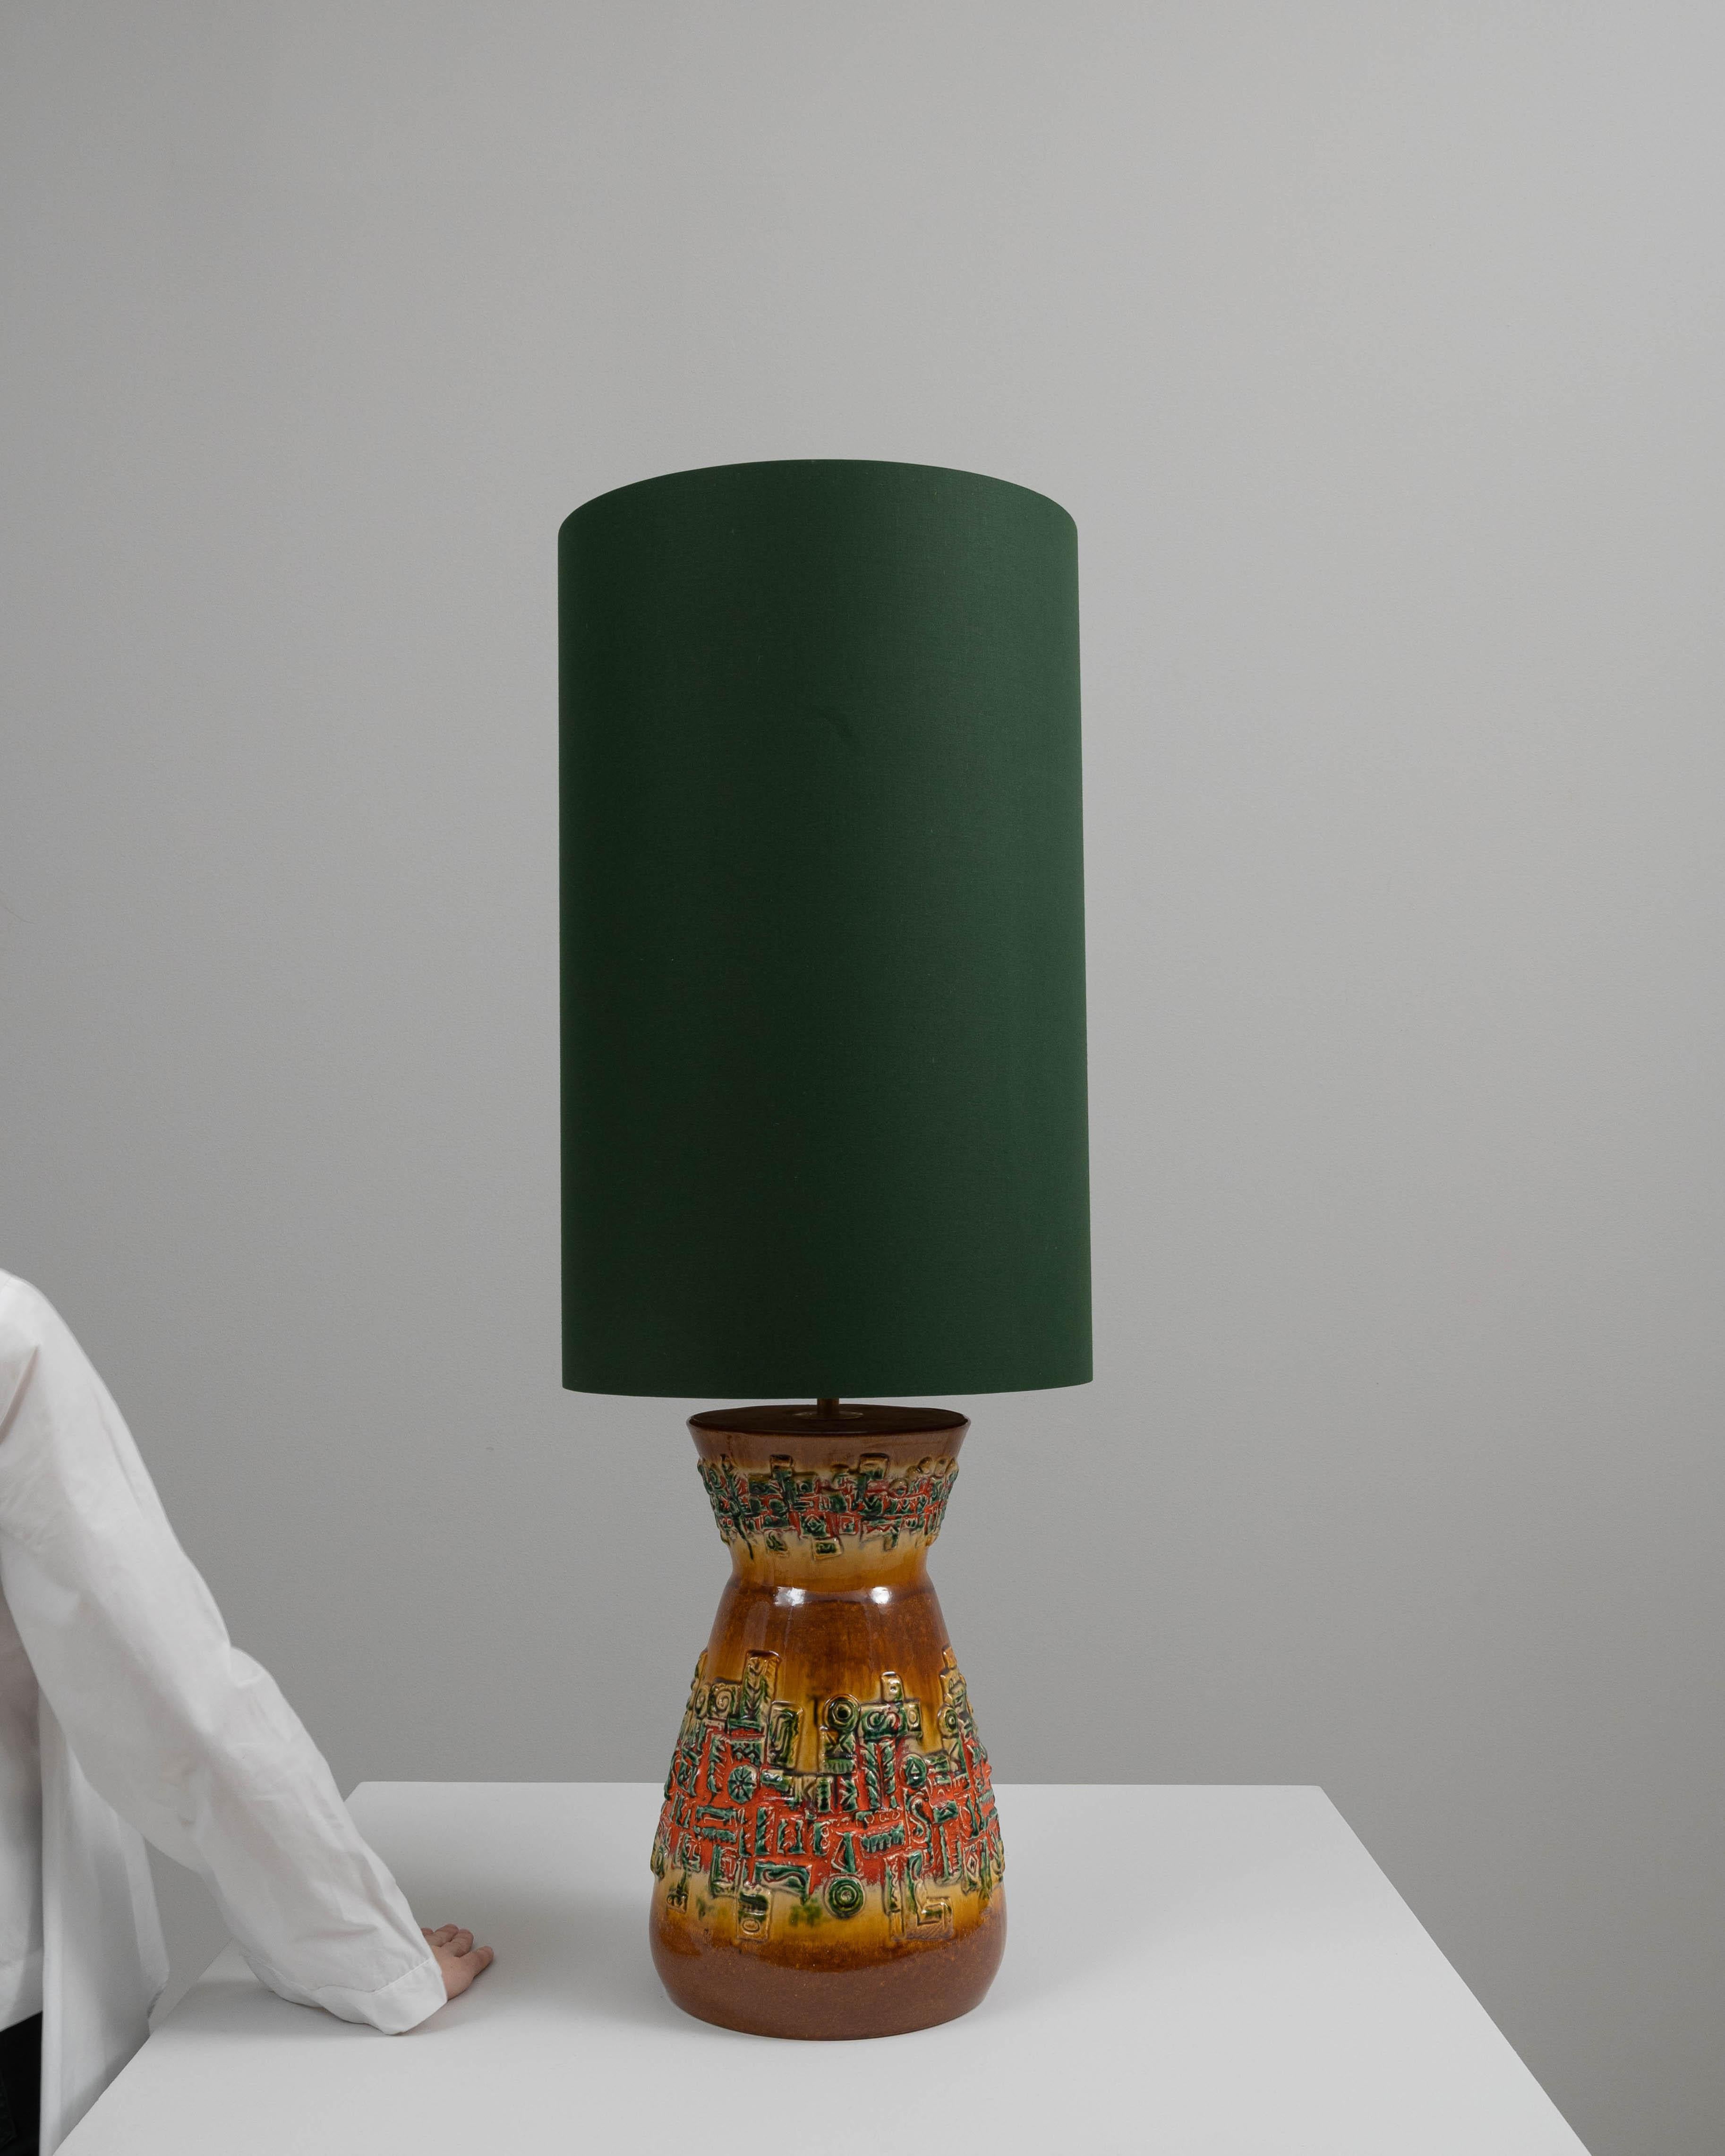 This captivating 20th-century German ceramic table lamp is an artful blend of functionality and detailed craftsmanship. The base is adorned with a complex, raised pattern featuring hints of earthy tones and vibrant greens, giving it a textured,